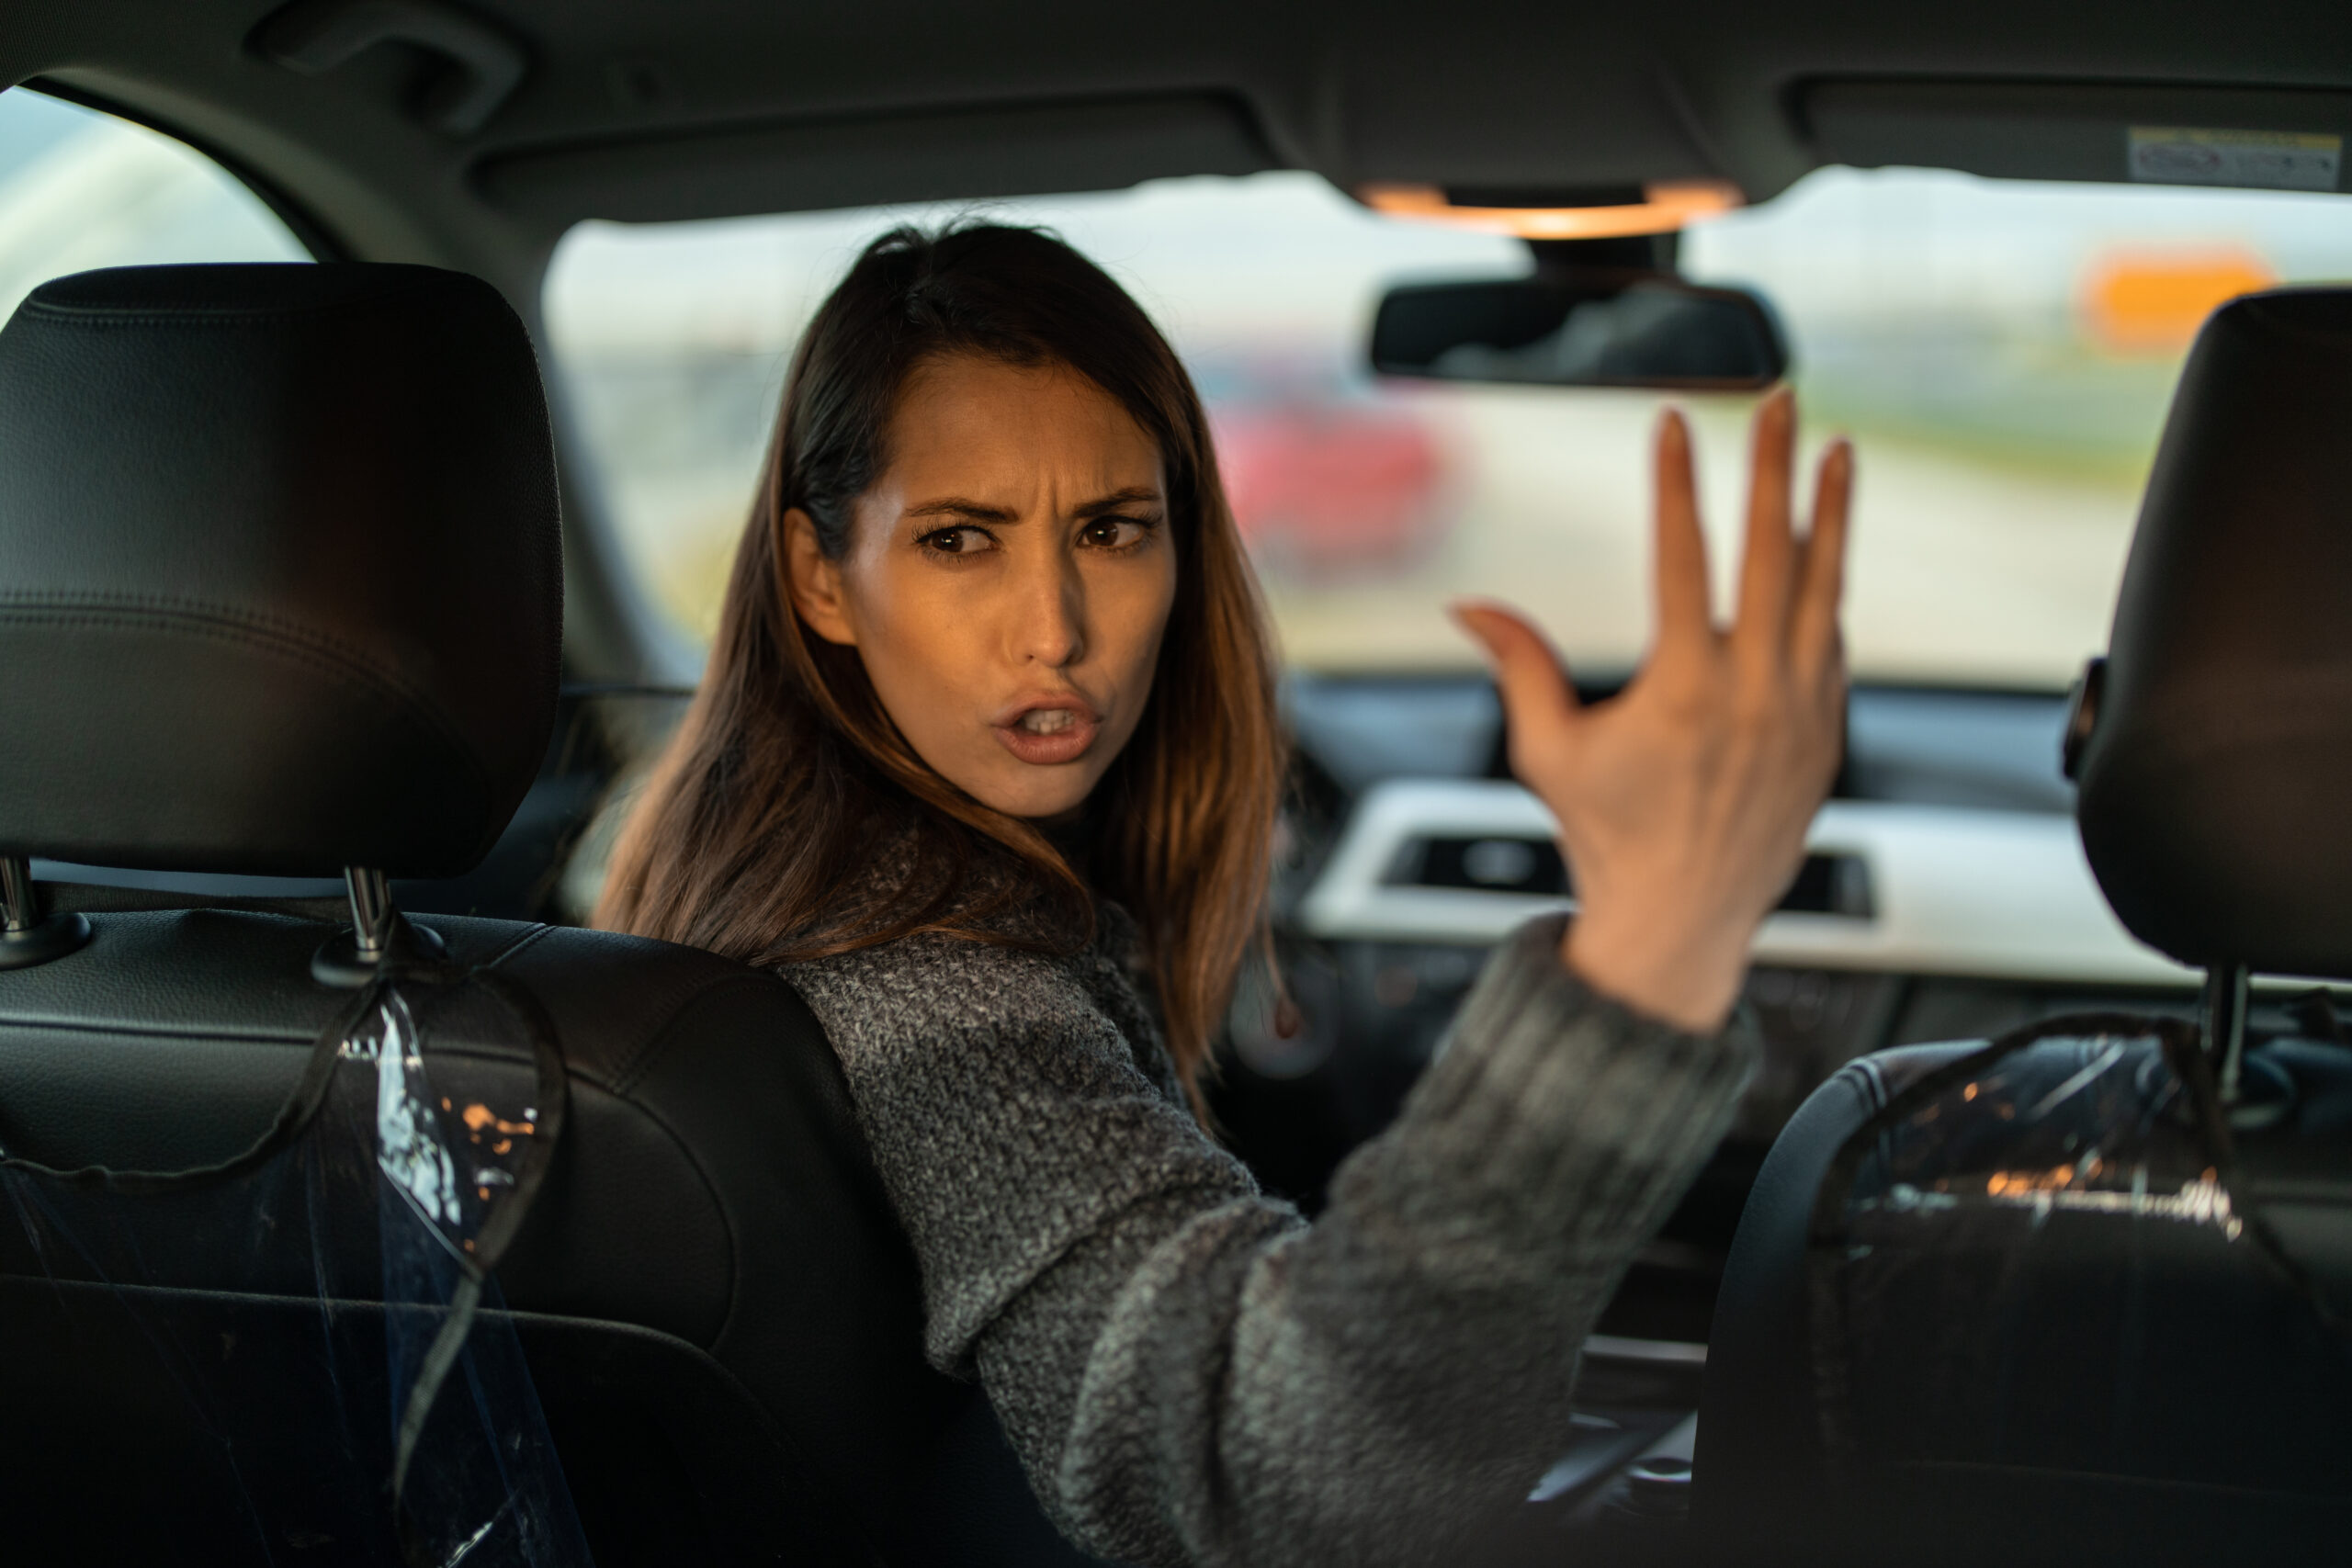 Angry displeased woman sitting in car, looking over shoulder and shouting